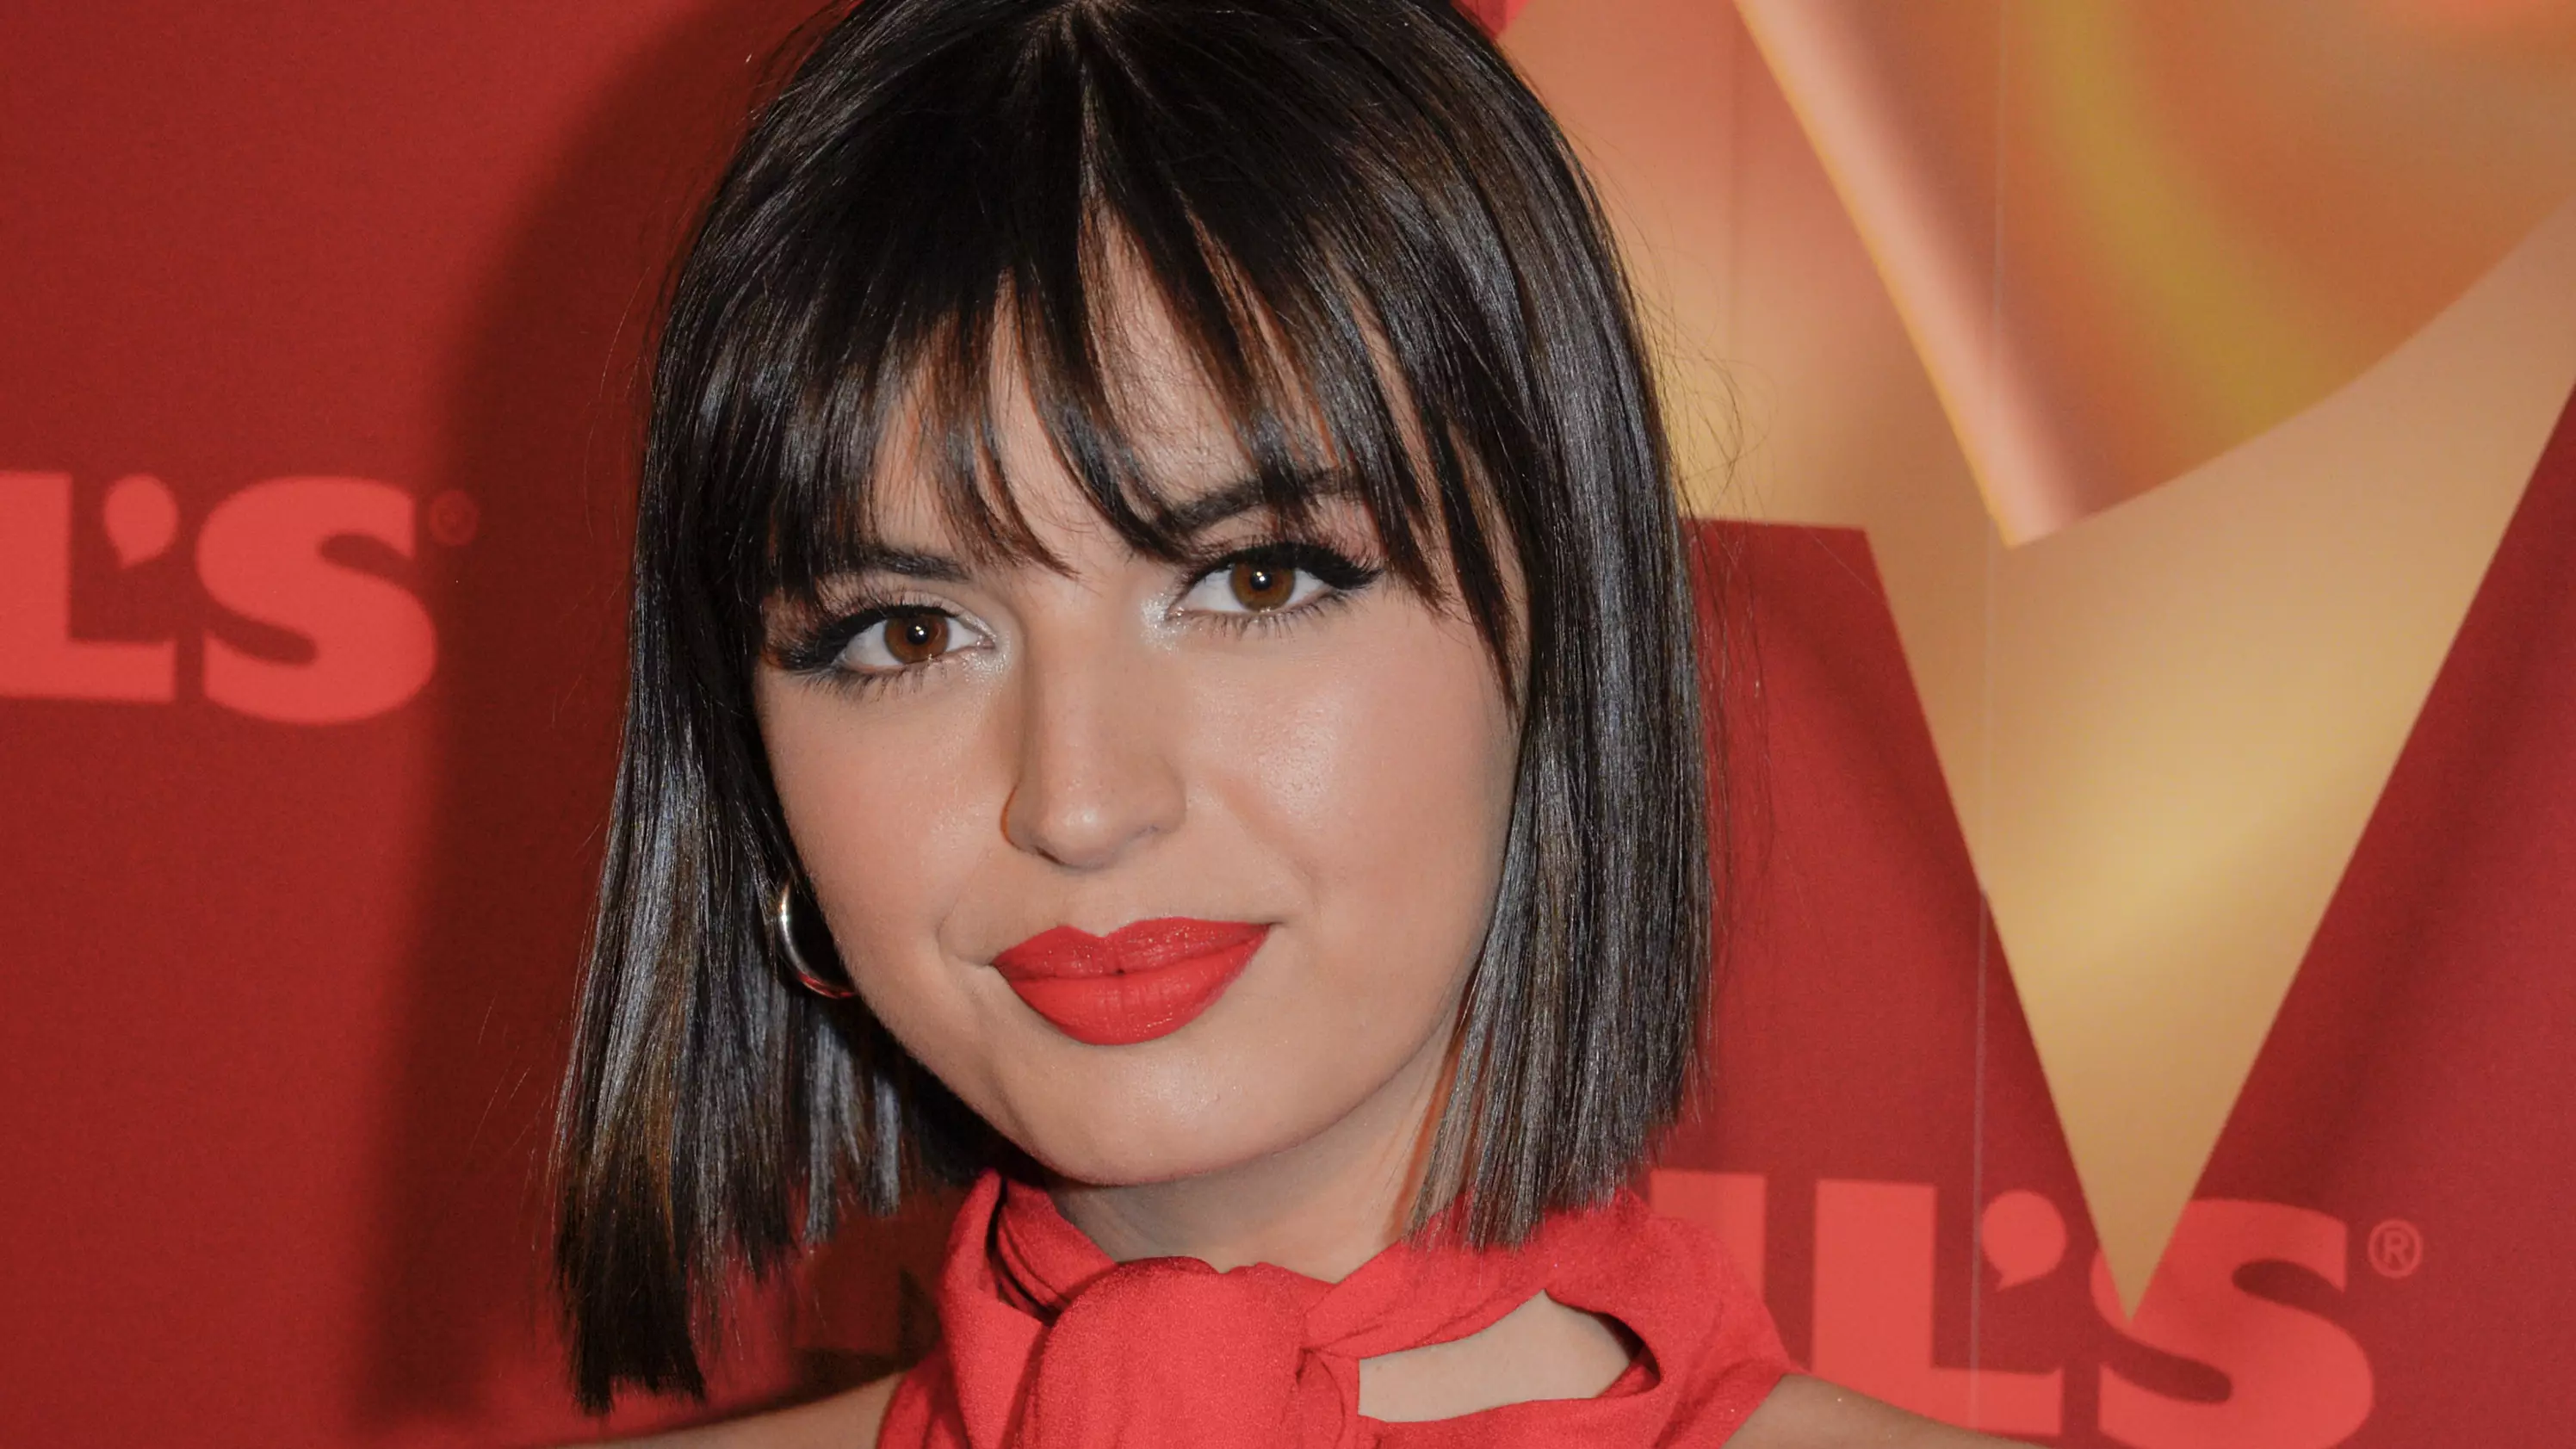 Friday Singer Rebecca Black Reveals That She Identifies As 'Queer'